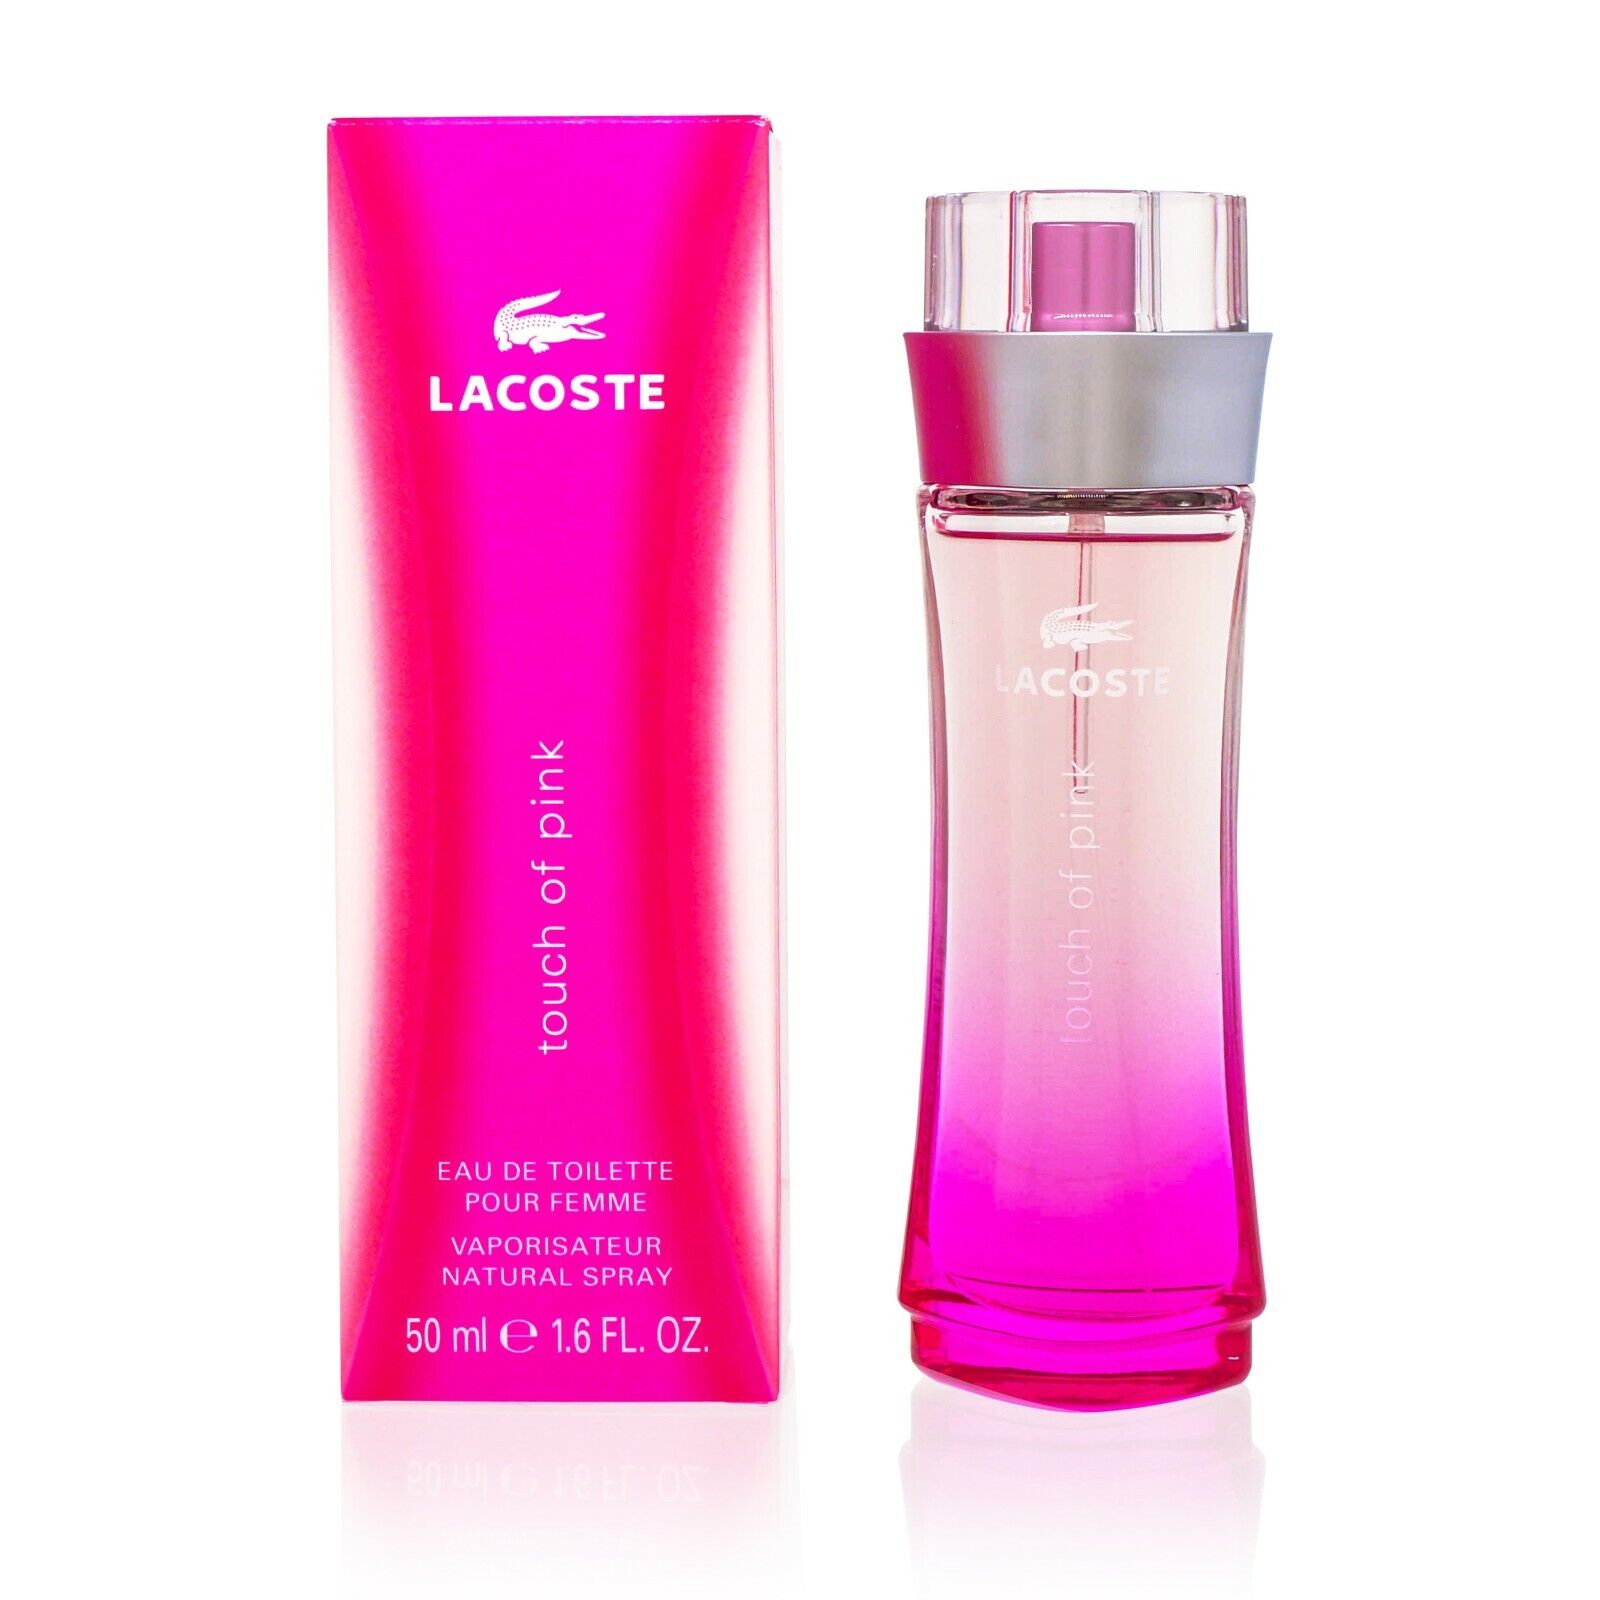 lacoste touch of pink 30ml